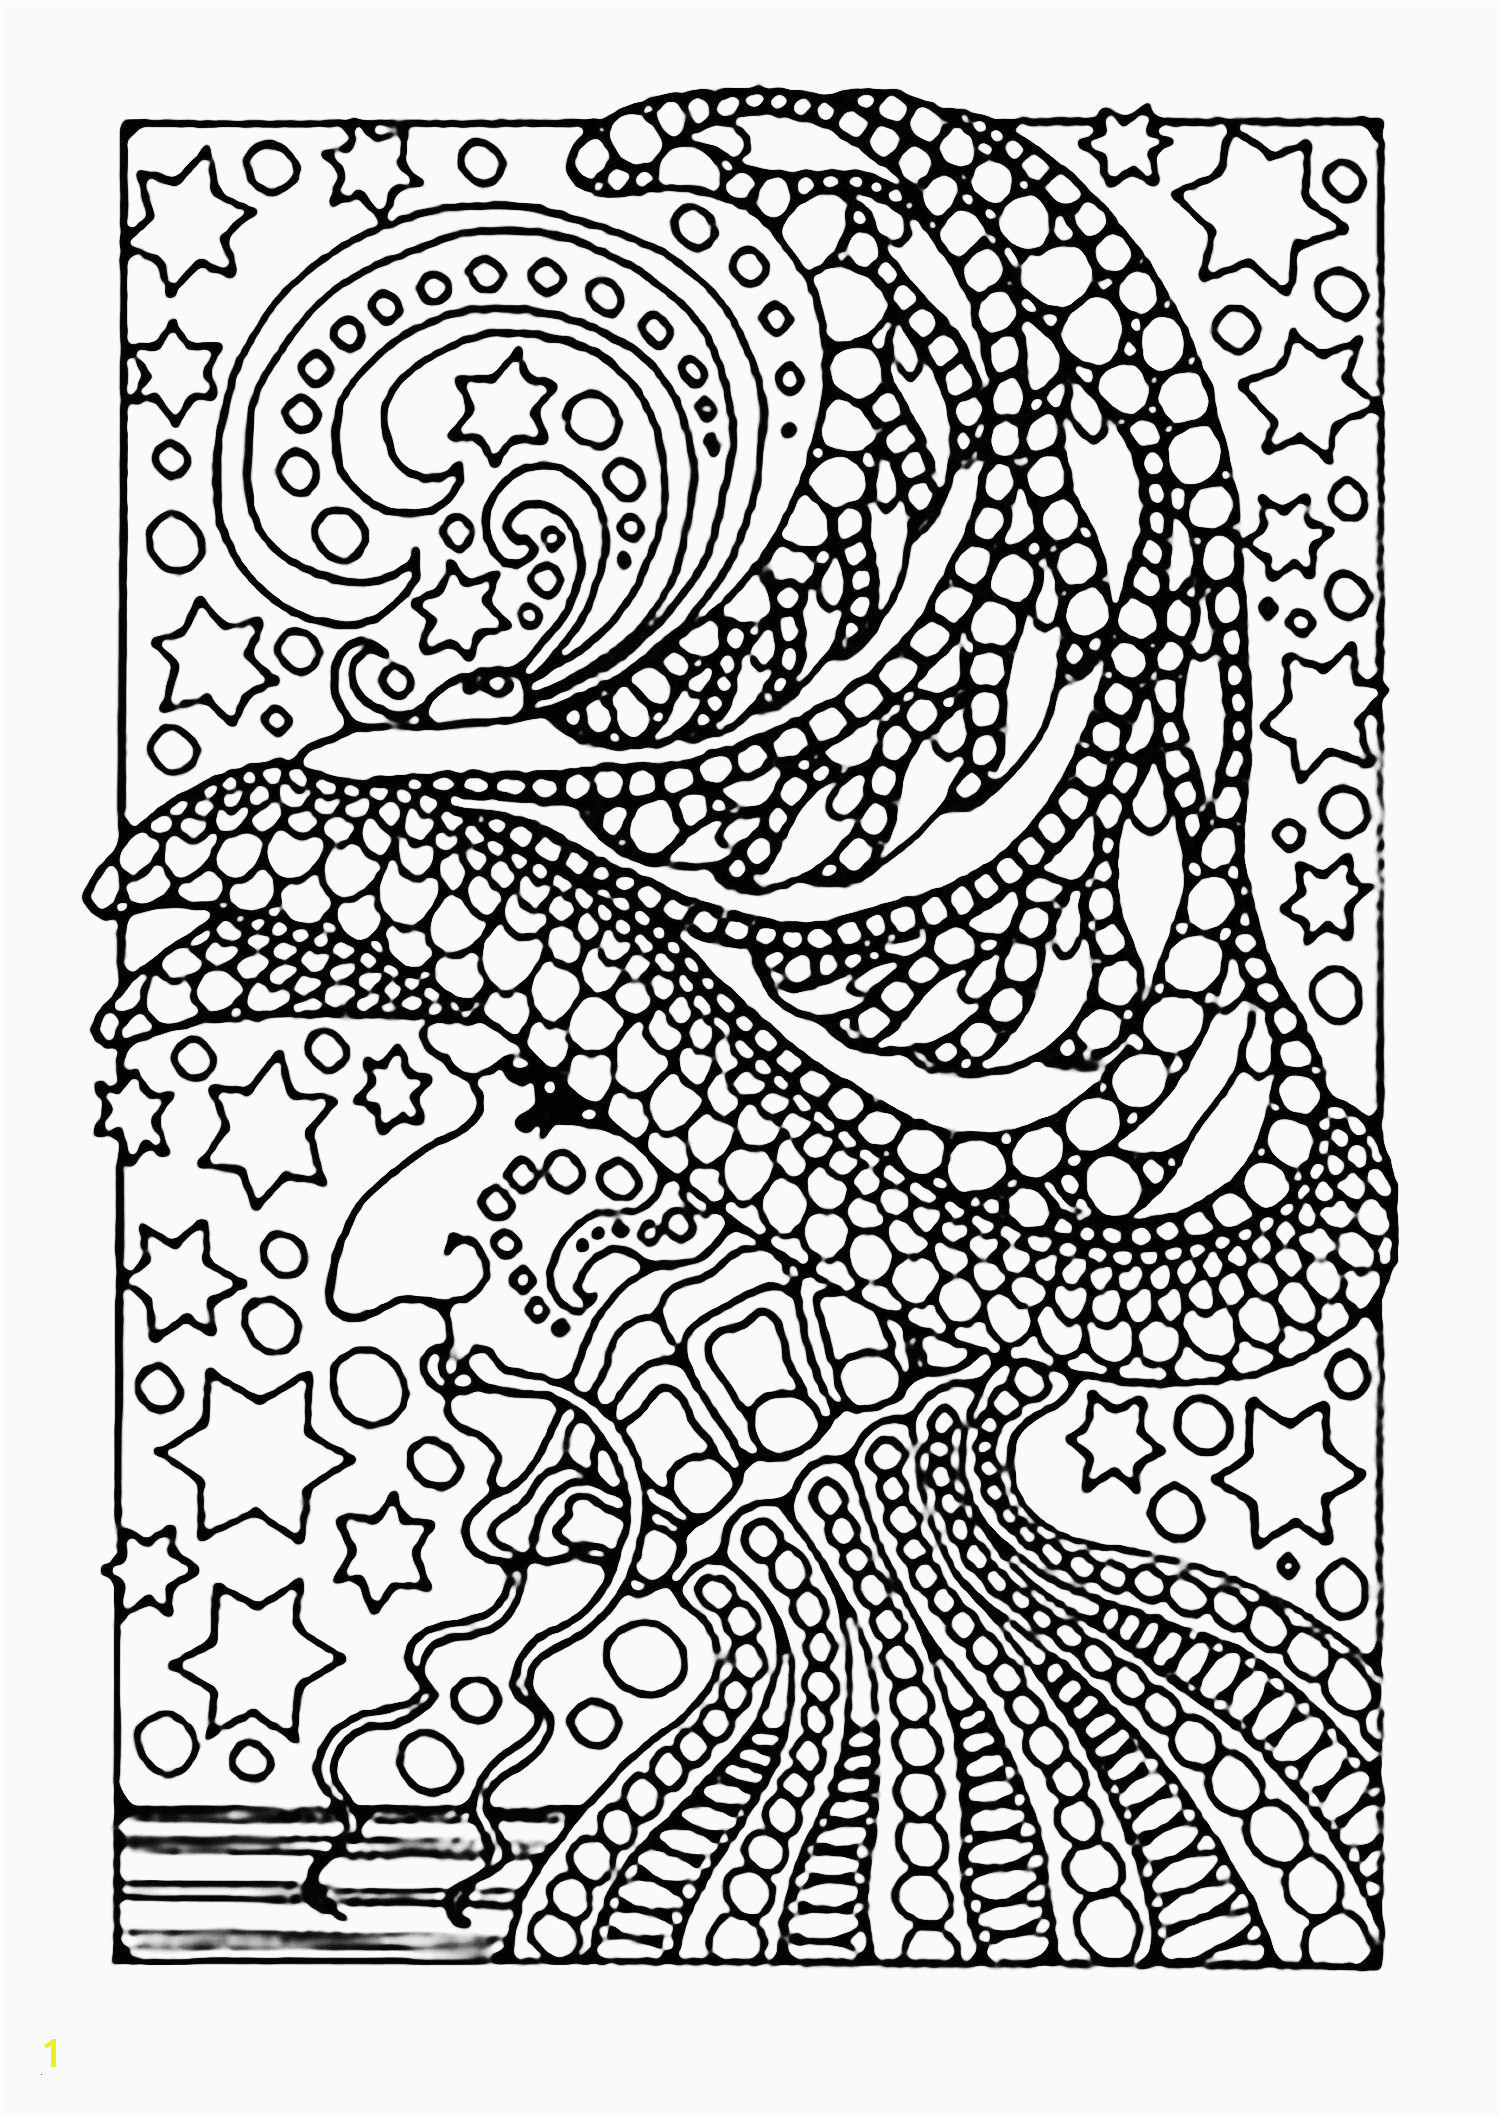 Free Printable Wedding Coloring Pages Free Coloring Pages Elegant Cool Coloring Page Unique Witch Coloring